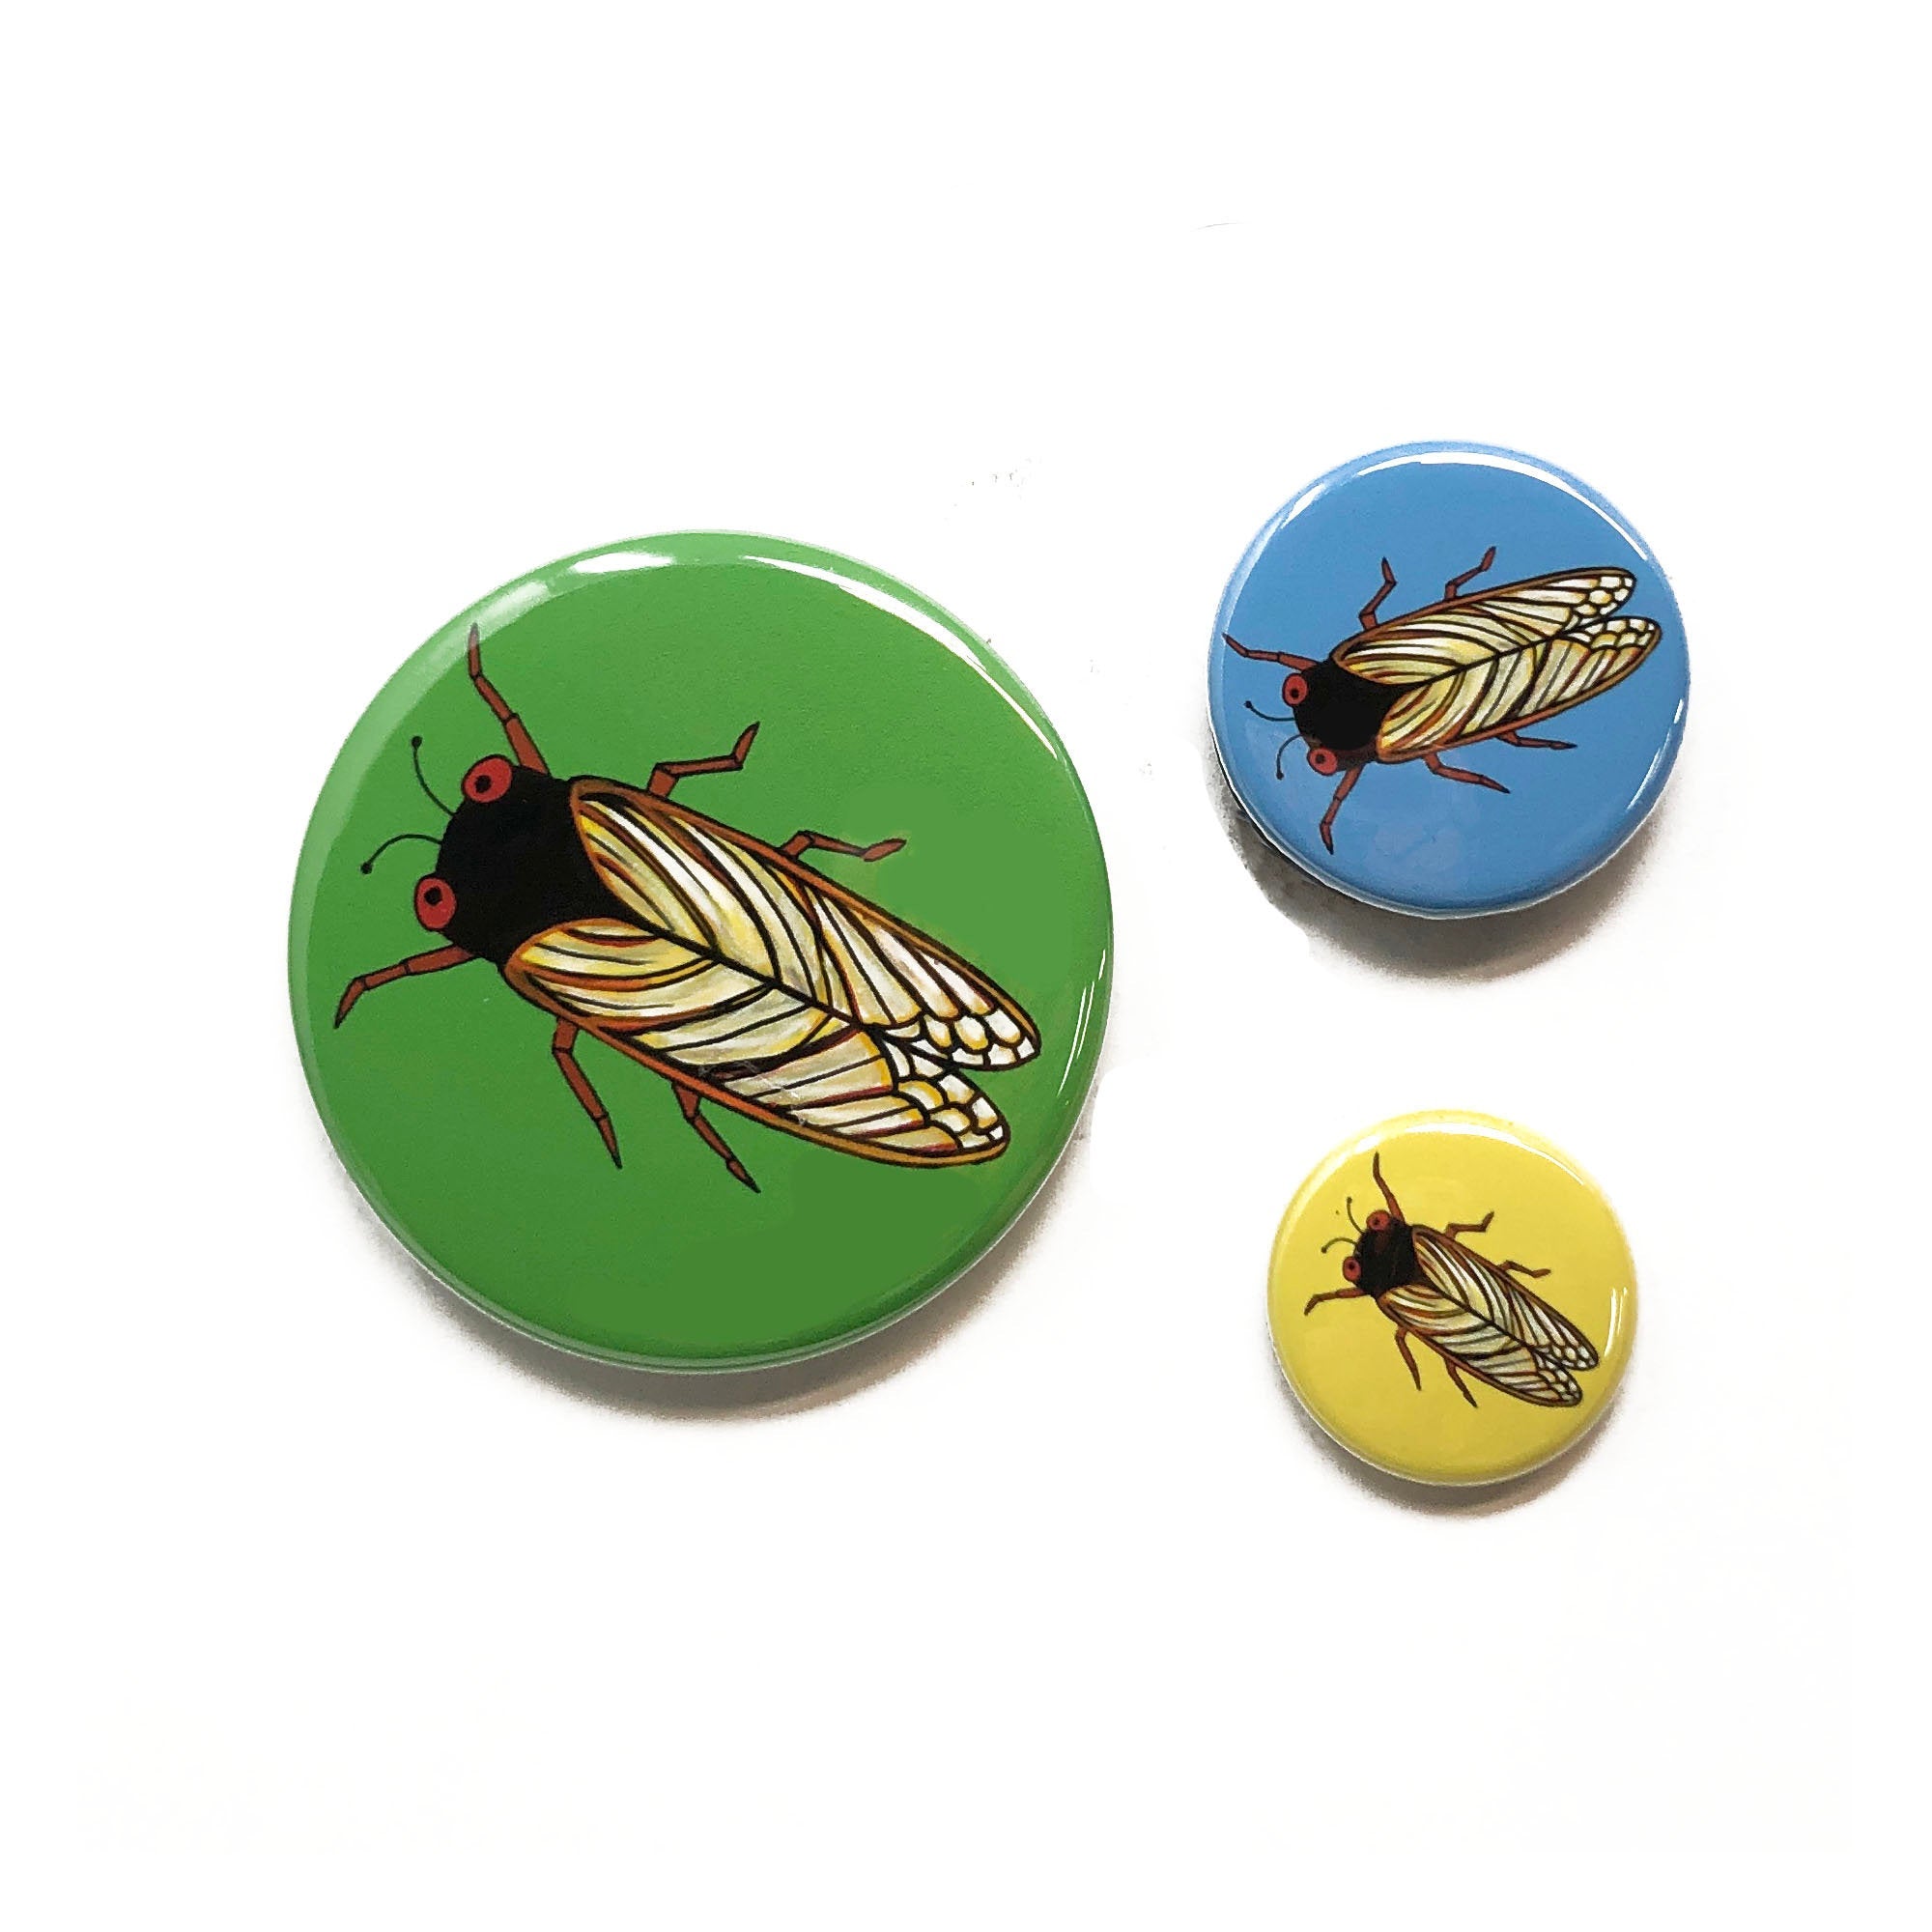 Cicada Pin Back Button, Magnet, or Mirror - Choose Cicada on Blue, Green, or Yellow - 1 Inch, 1.25 Inch, or 2.25 Inch - Brood X - Insect